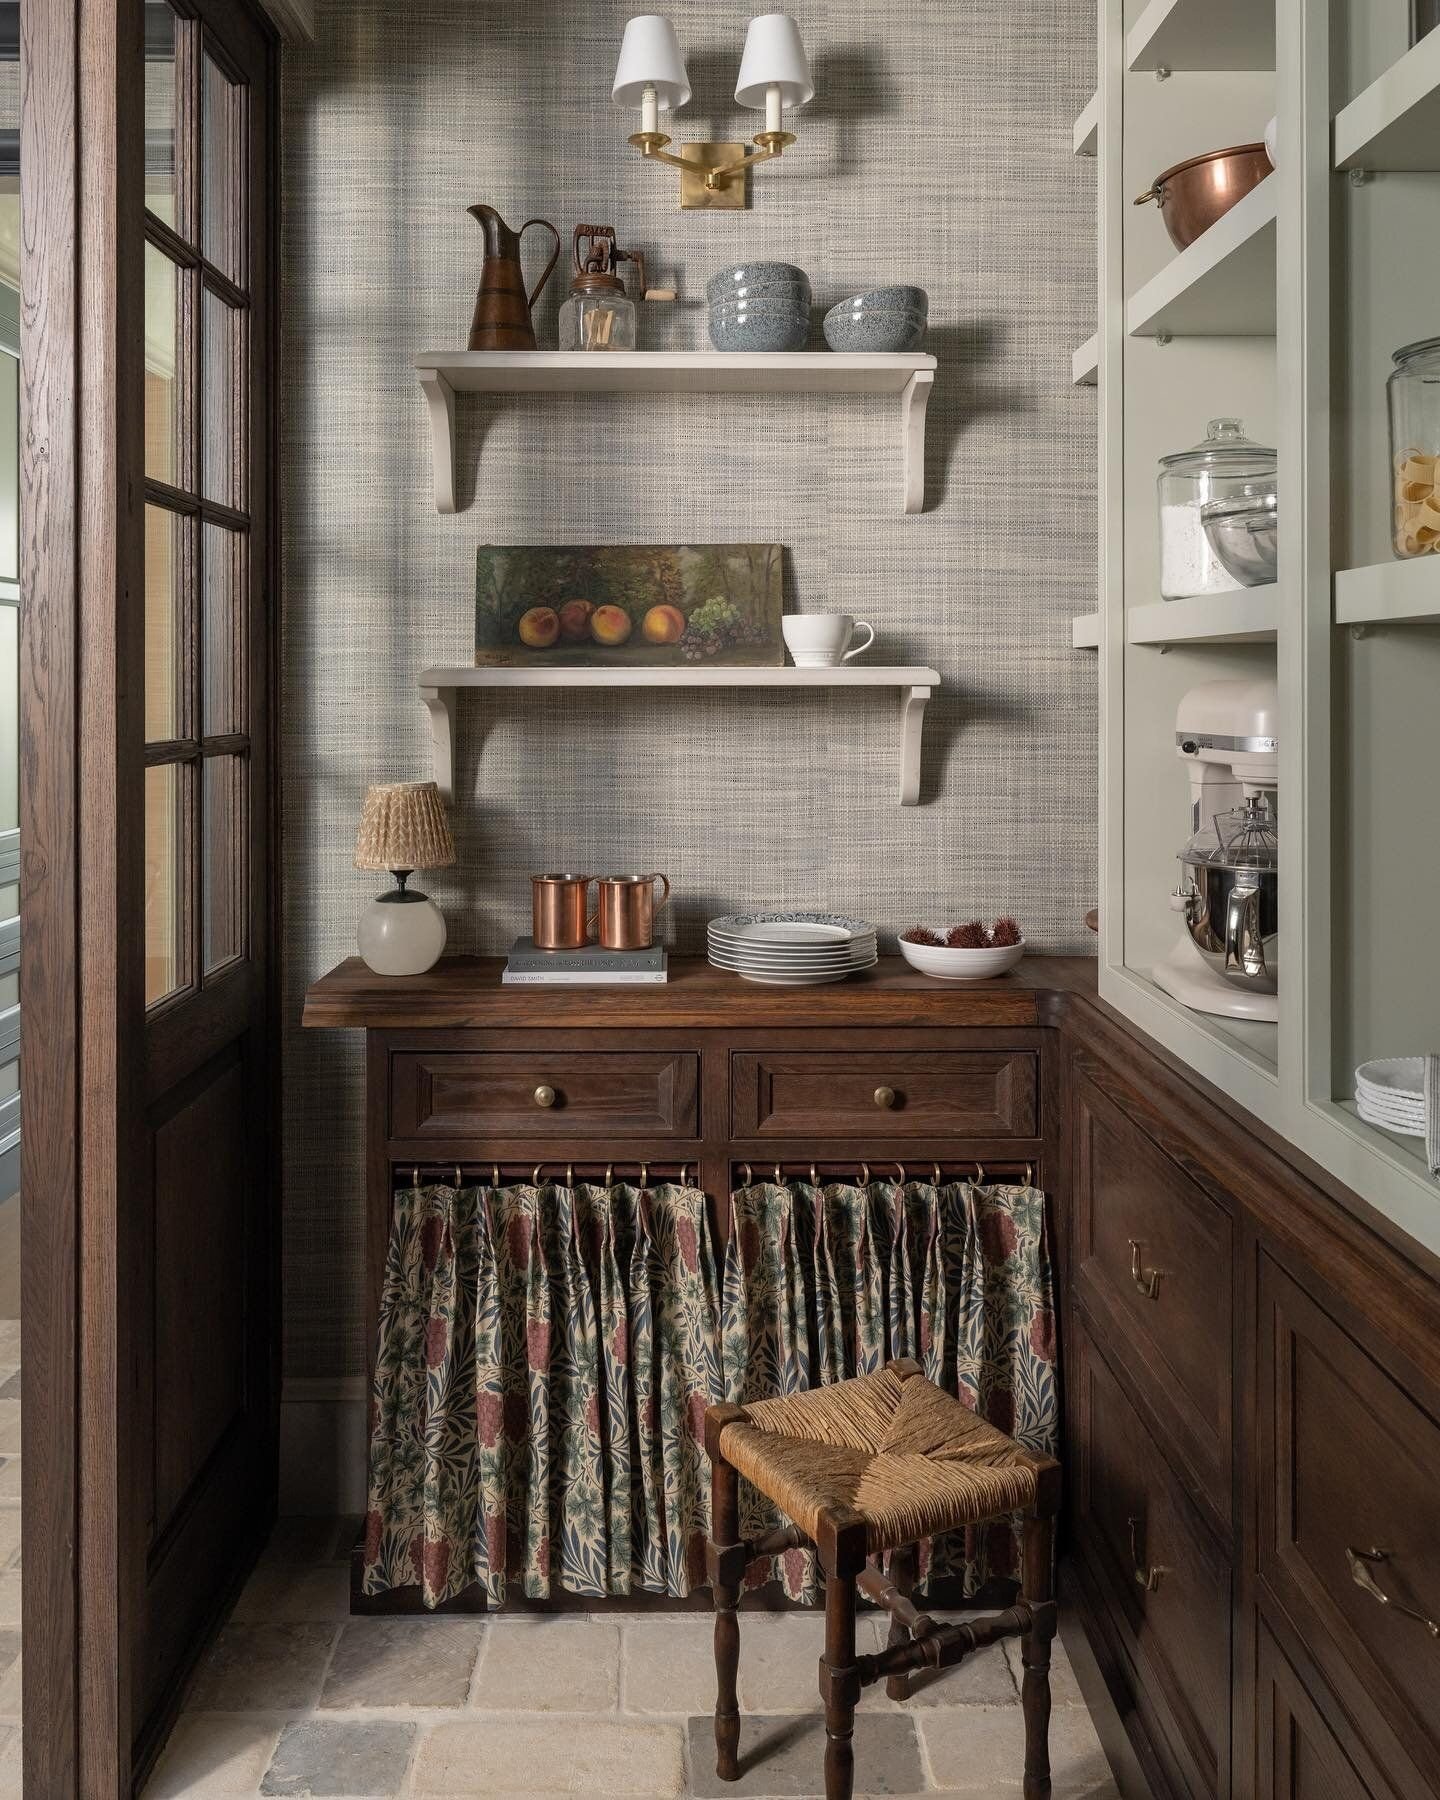 This pantry space has it all and is one of my main inspirations- the wallpaper, skirted cabinet, + open shelving!